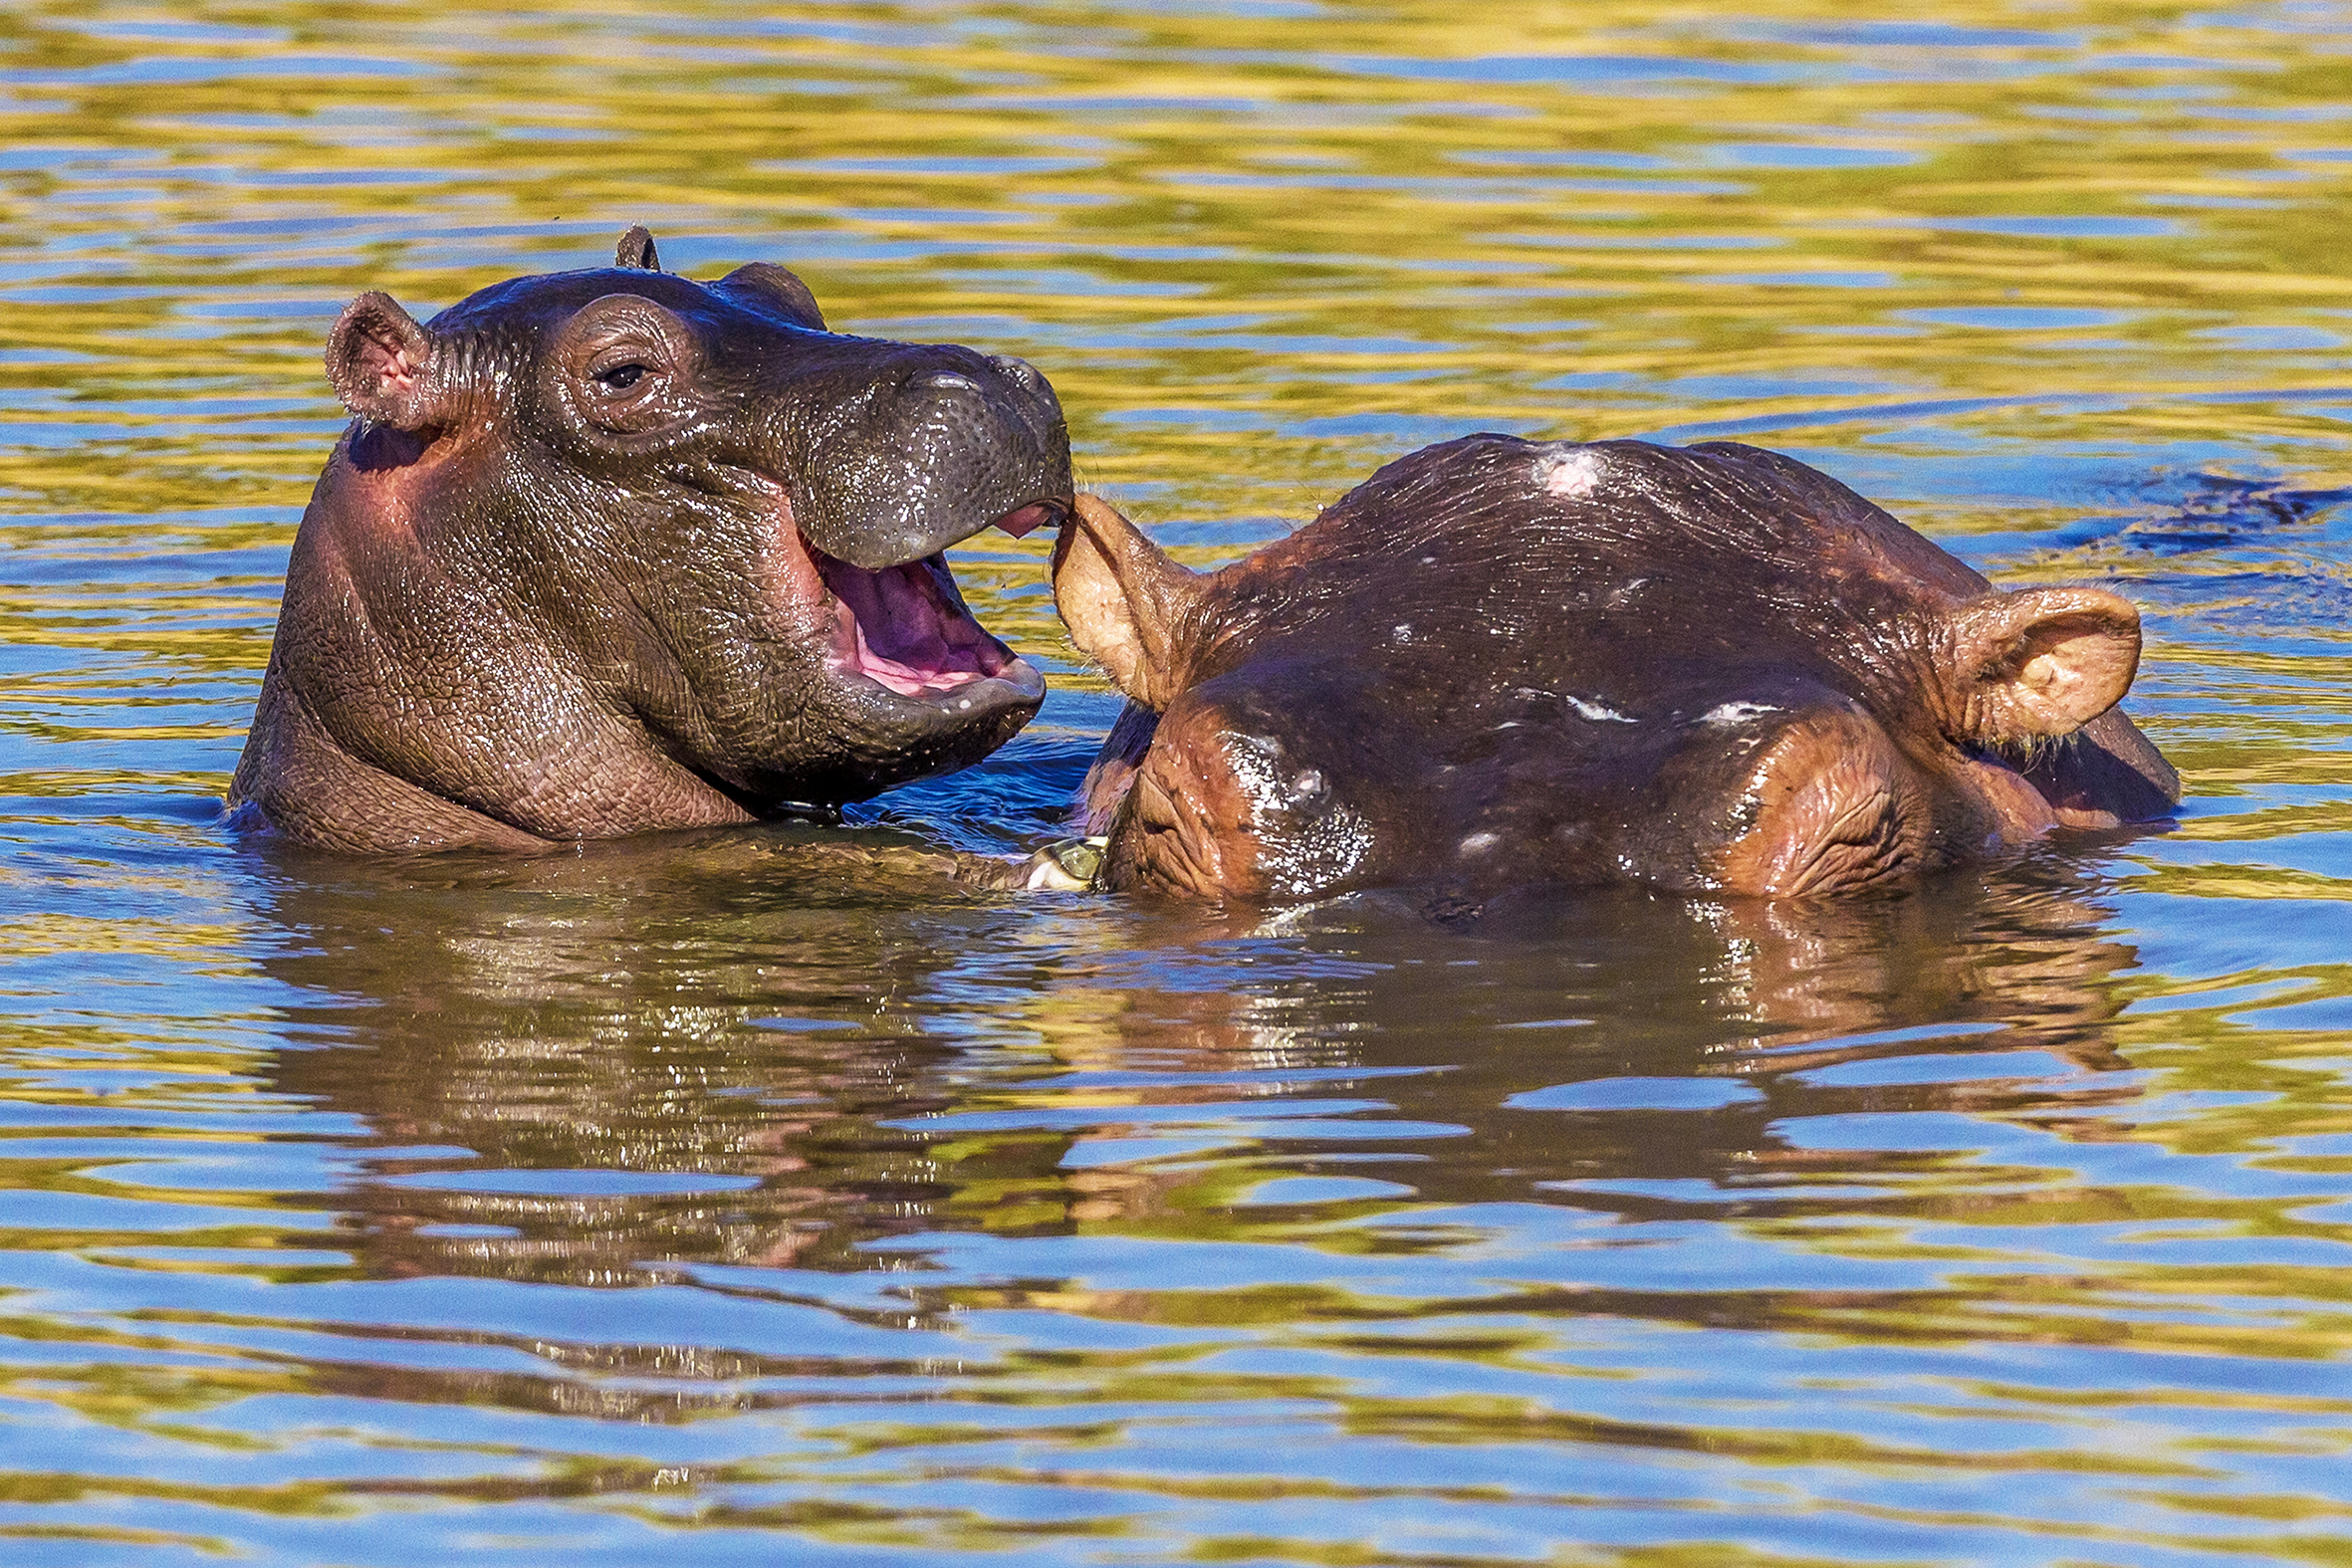 Laughing hippo